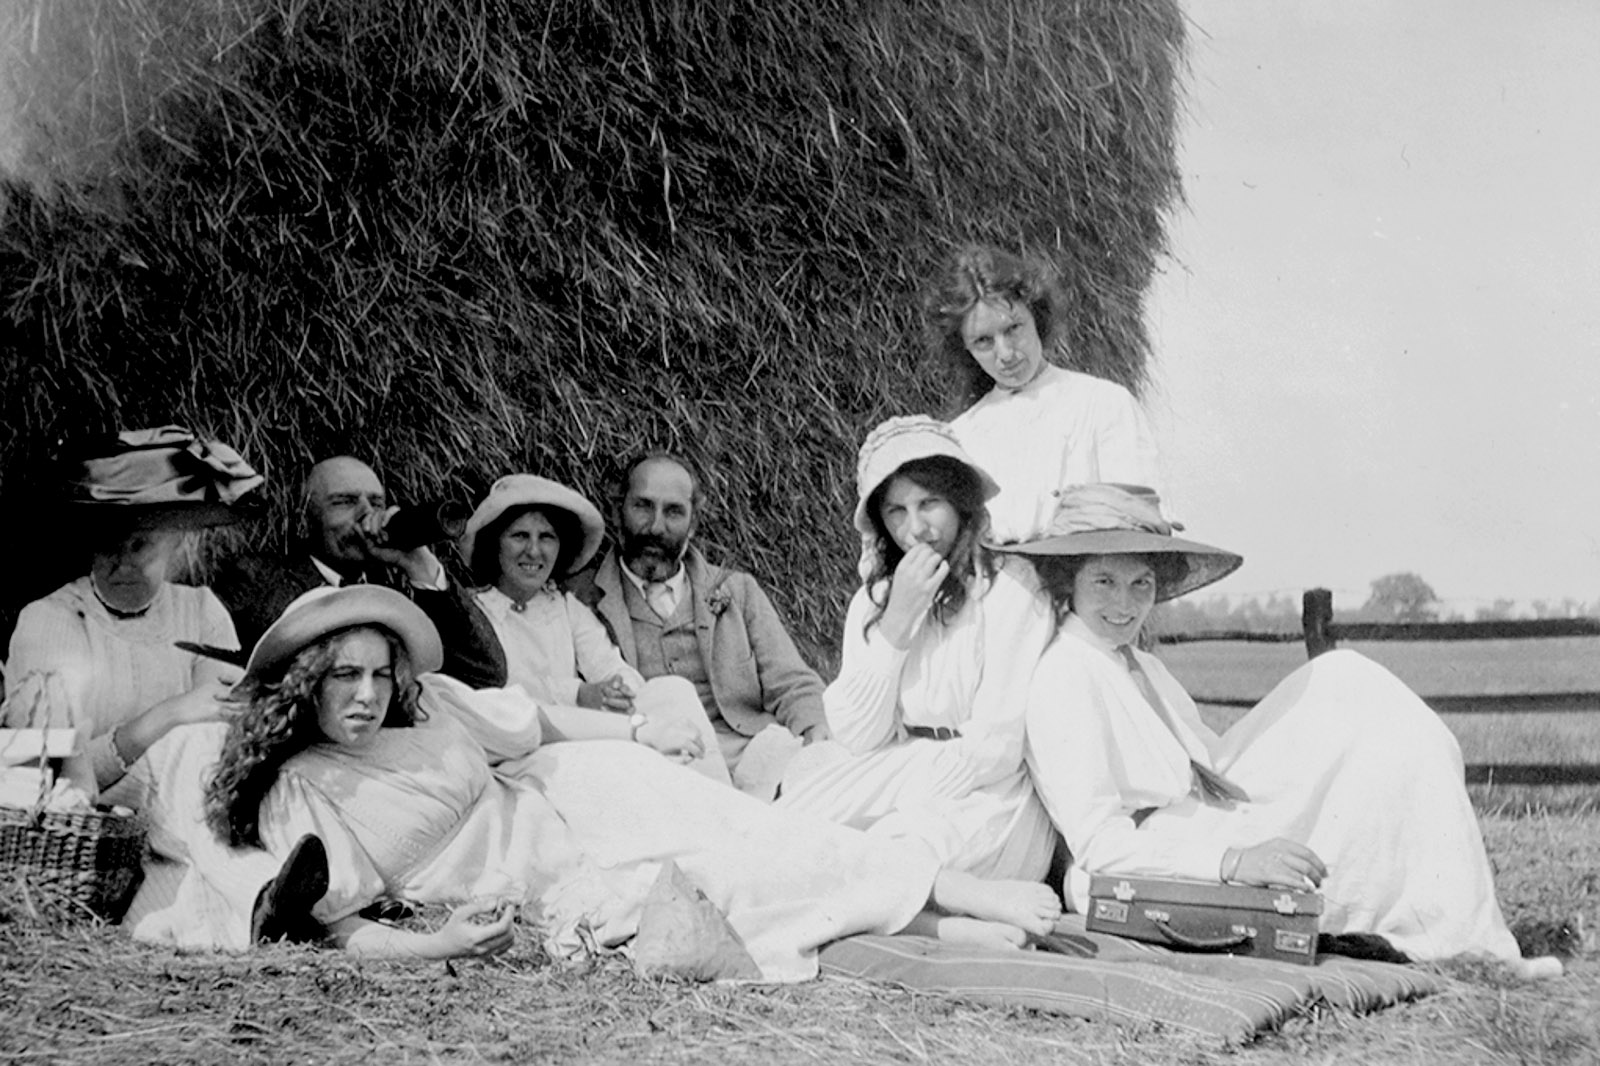 From back center to right, Daphne, Sydney, Noel, Margery, and Brynhild Olivier at a picnic, Hampshire, 1910